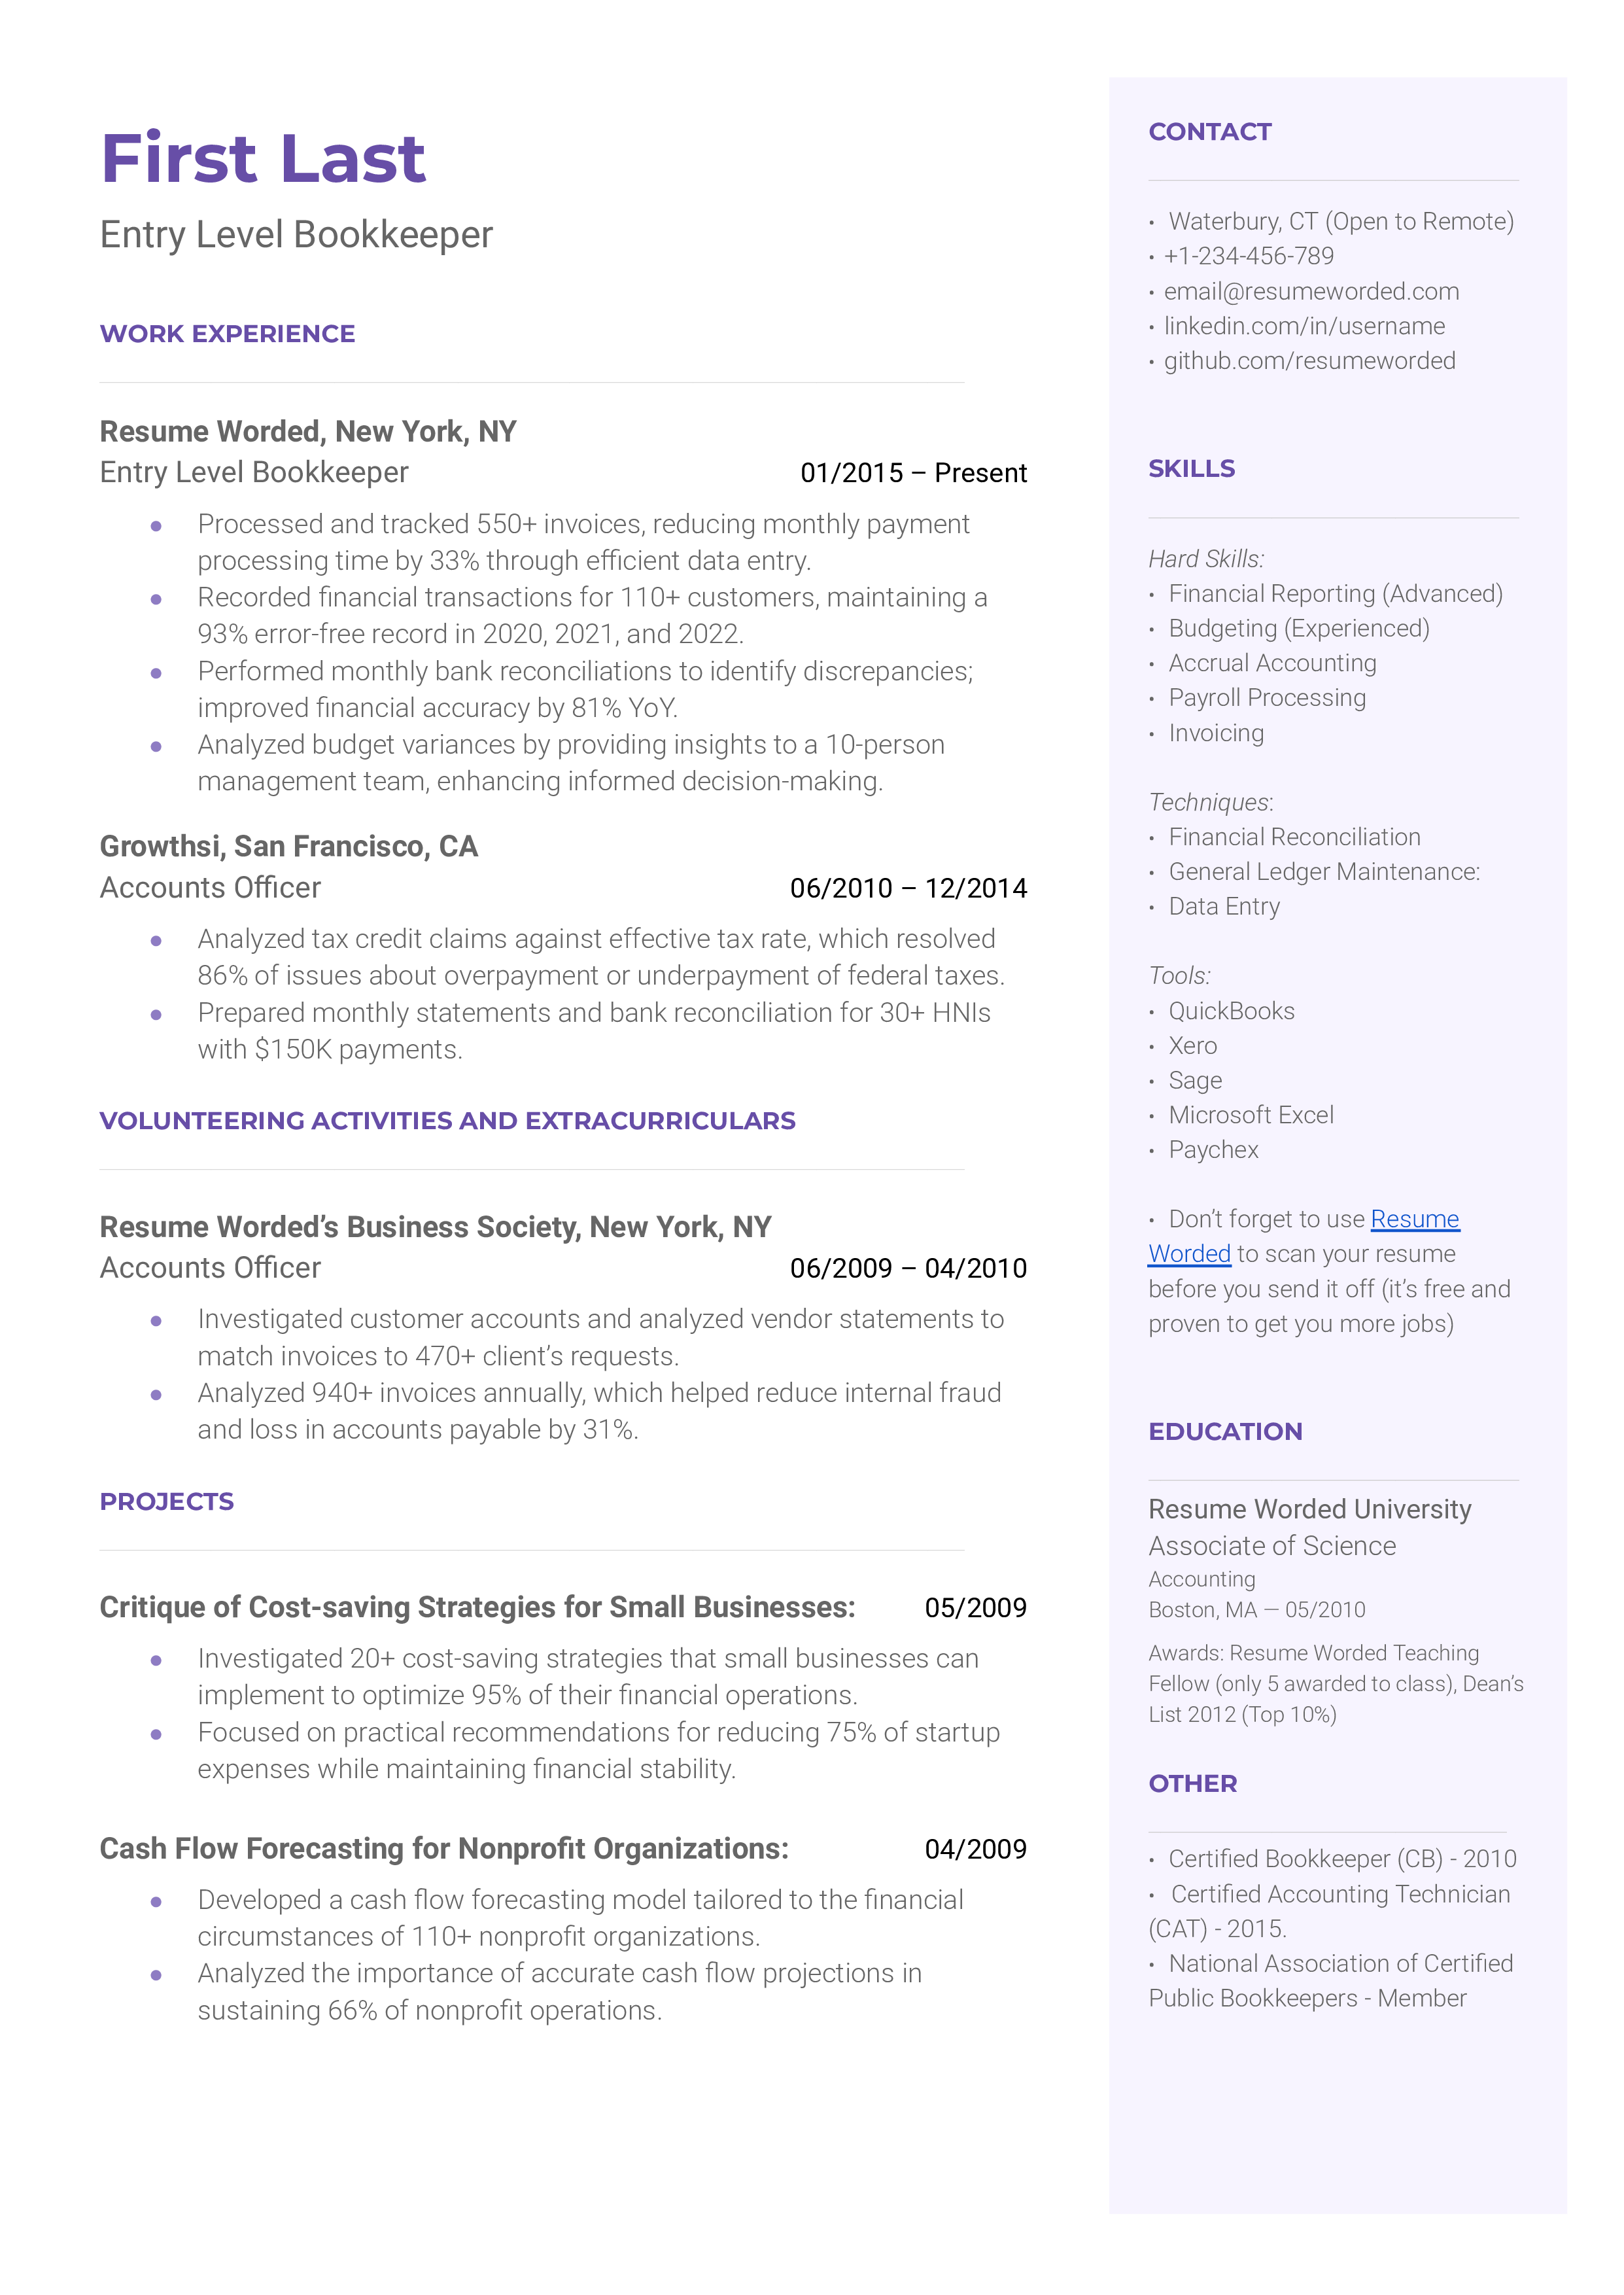 Entry-level bookkeeper resume showcasing accounting software knowledge and attention to detail.